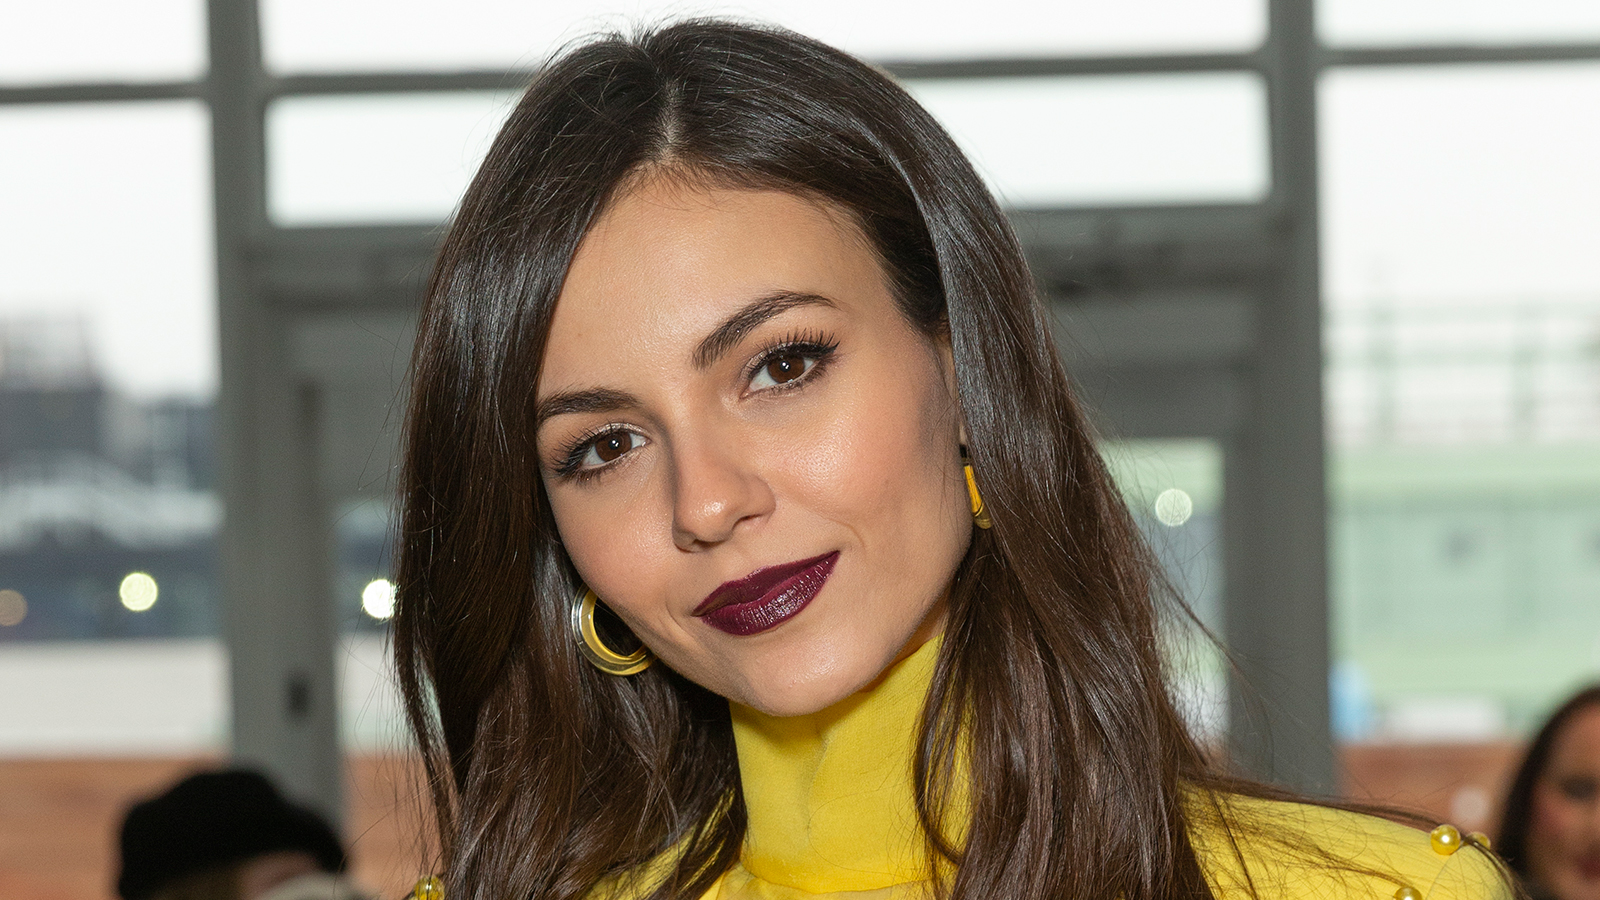 Victoria Justice's Best Fashion Moments â€” See the Pics!